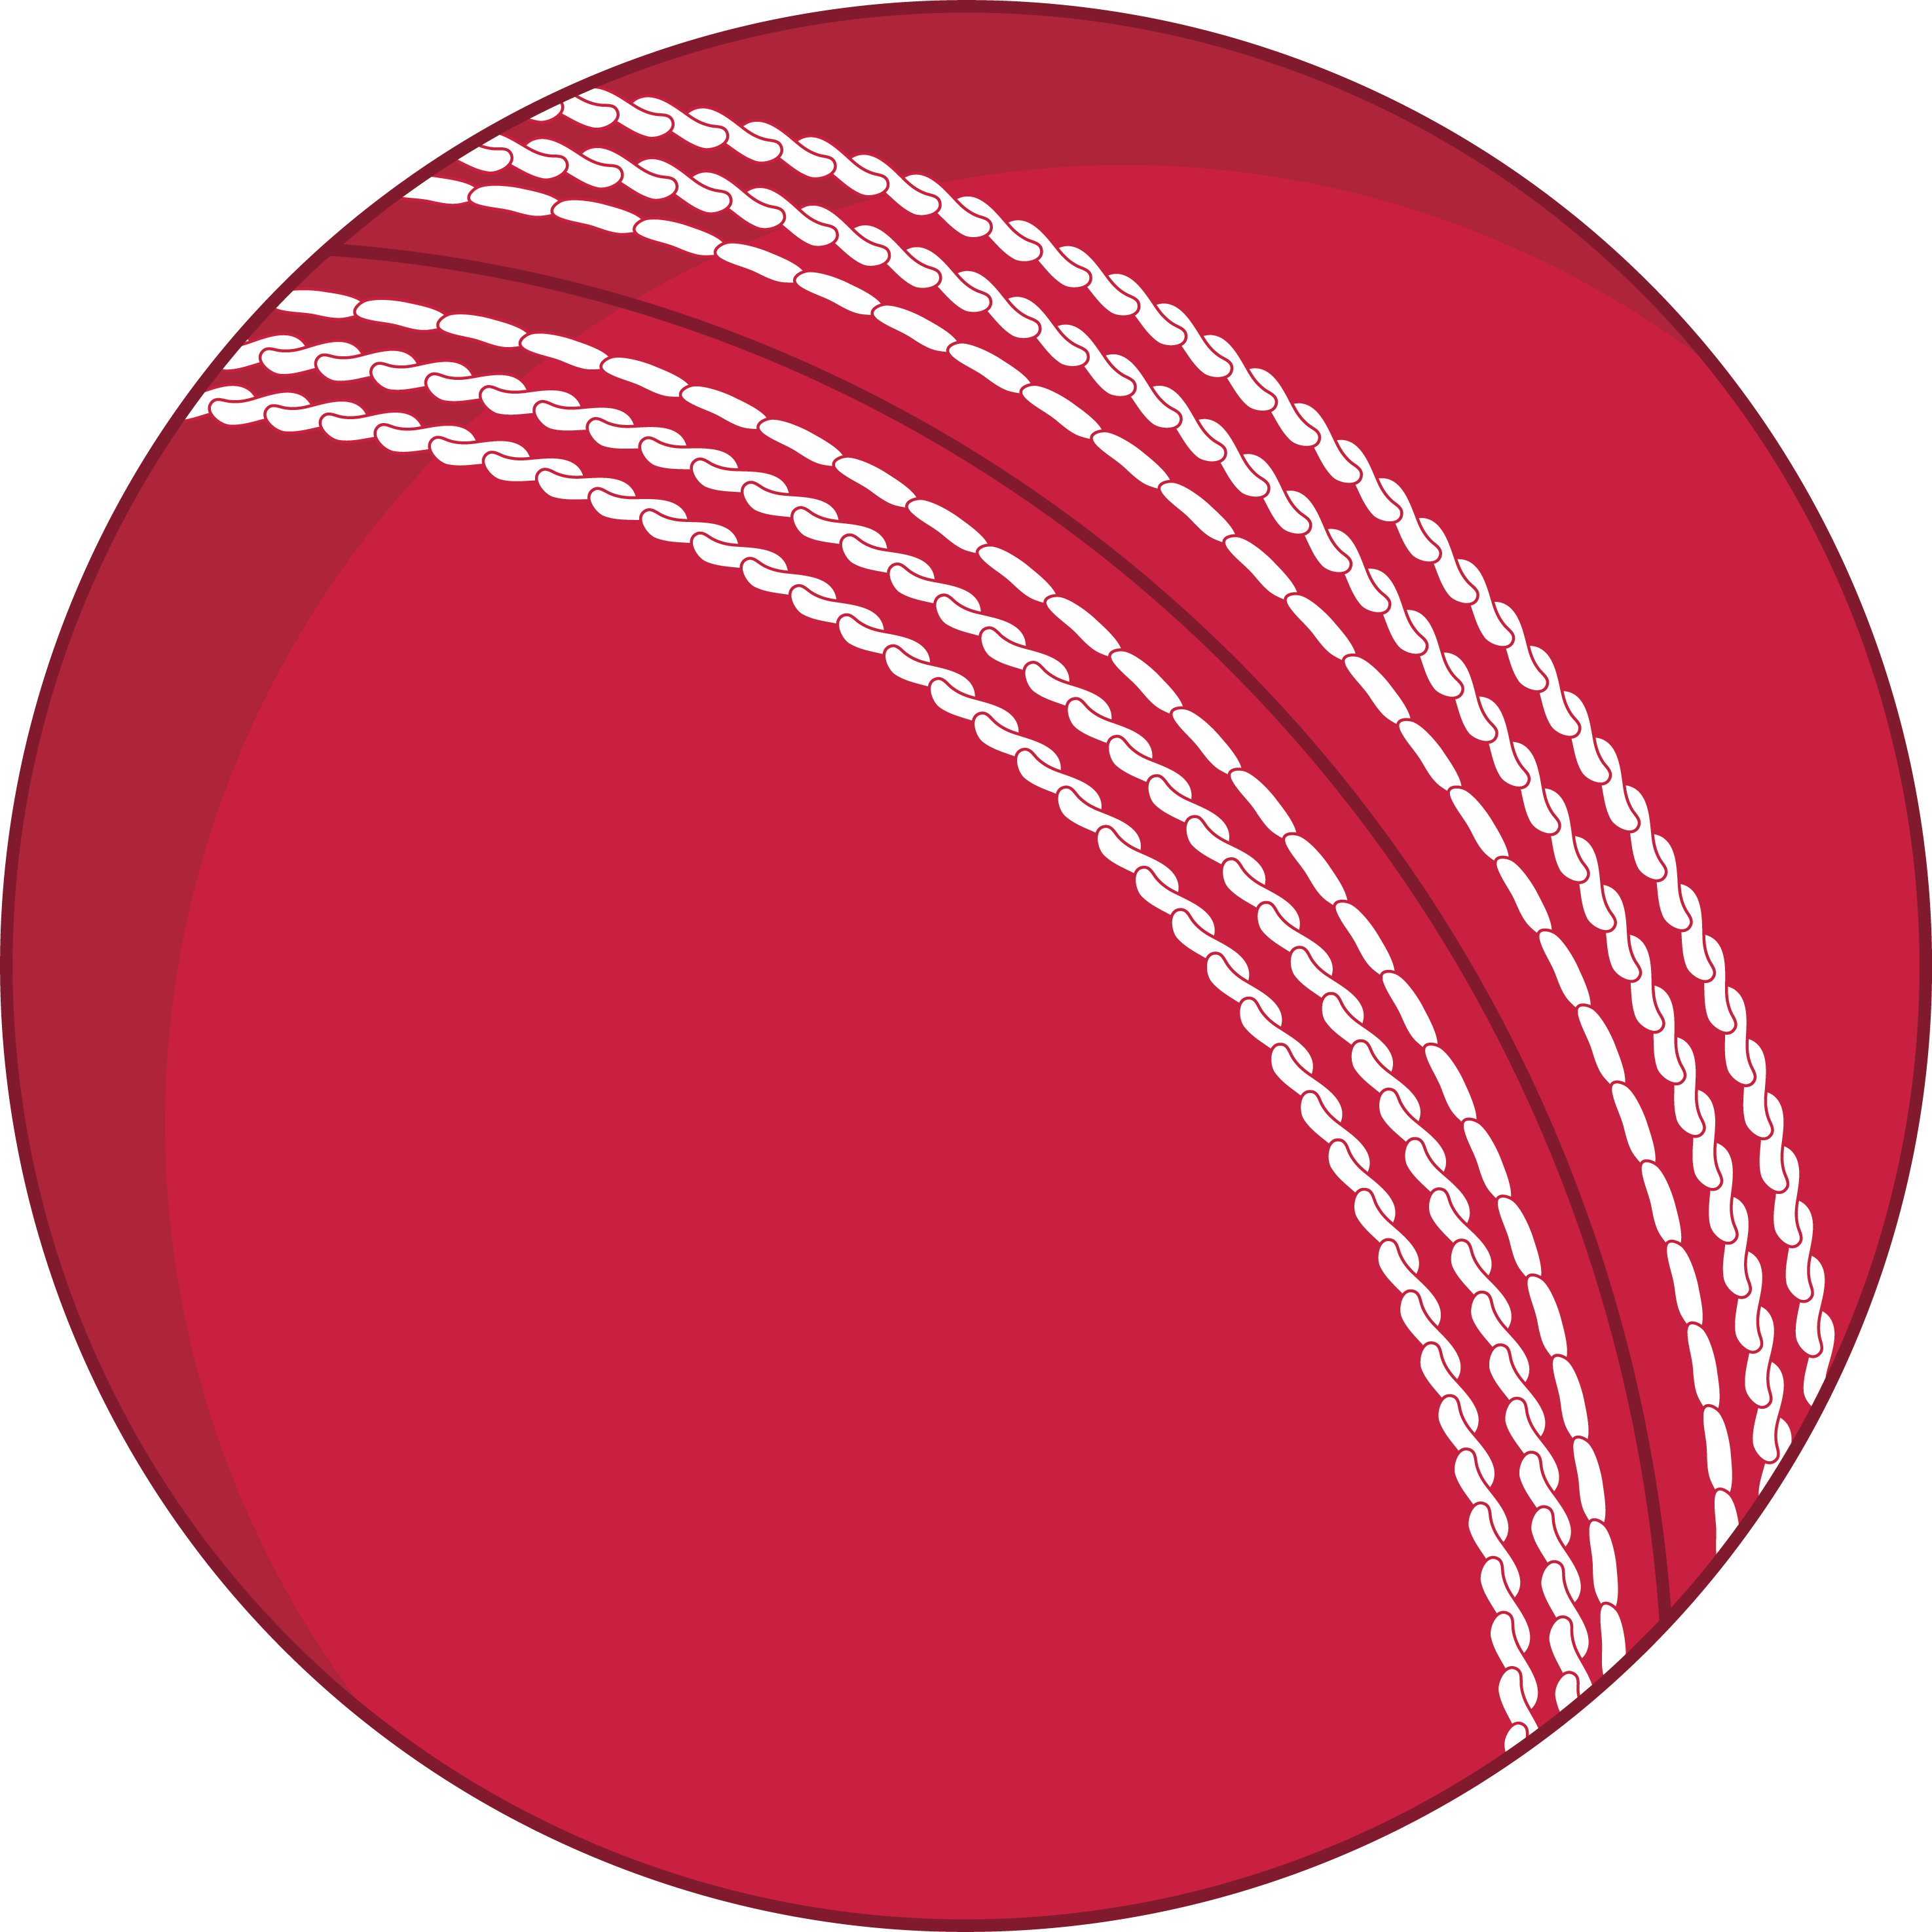 Cricket Ball Transparent Image Png Images - Cricket (2950x2950)